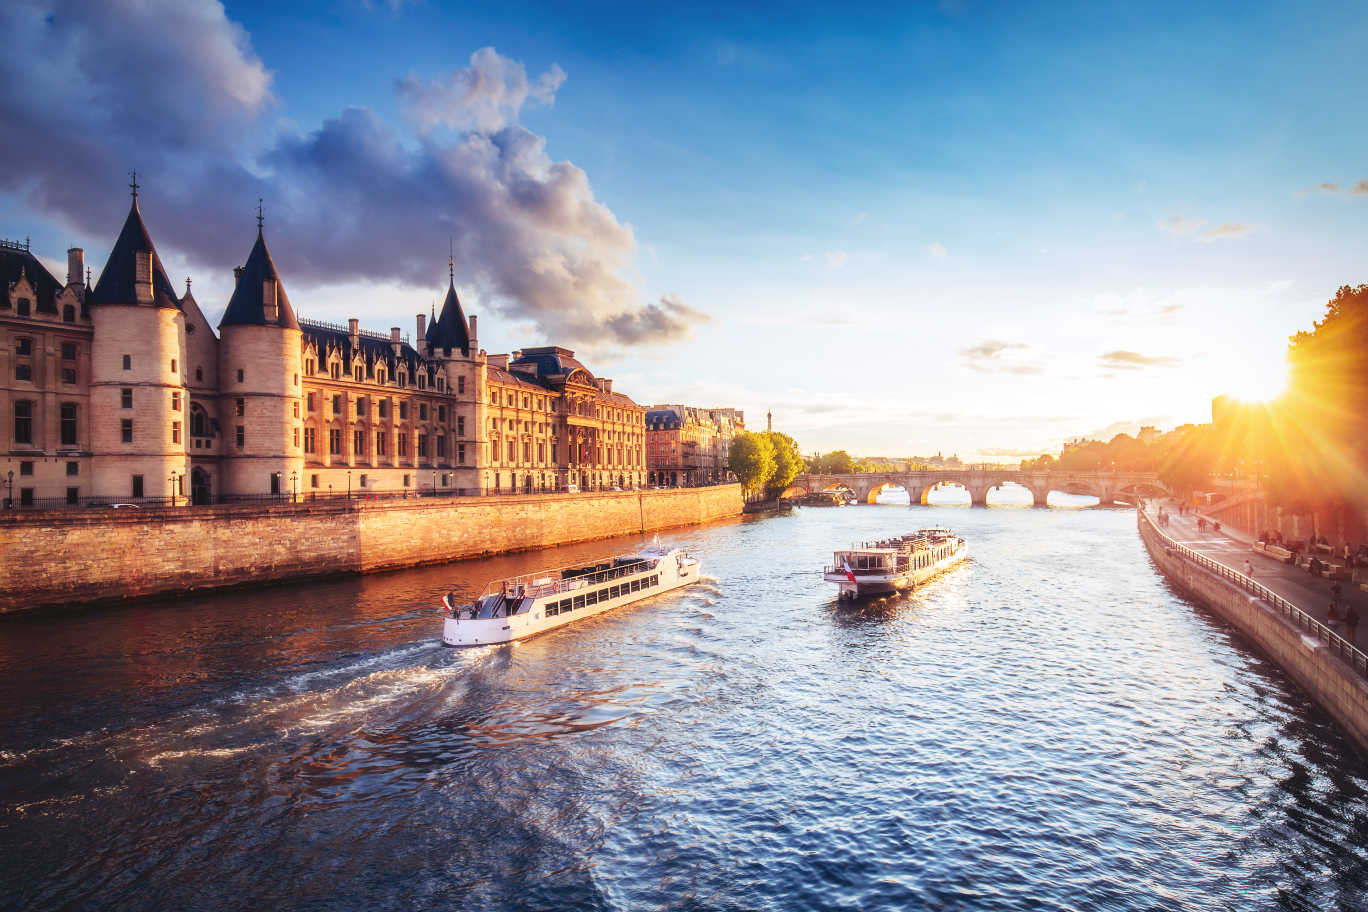 Europe, France, Paris, a view of the River Seine at sunset with boats cruising towards a bridge.